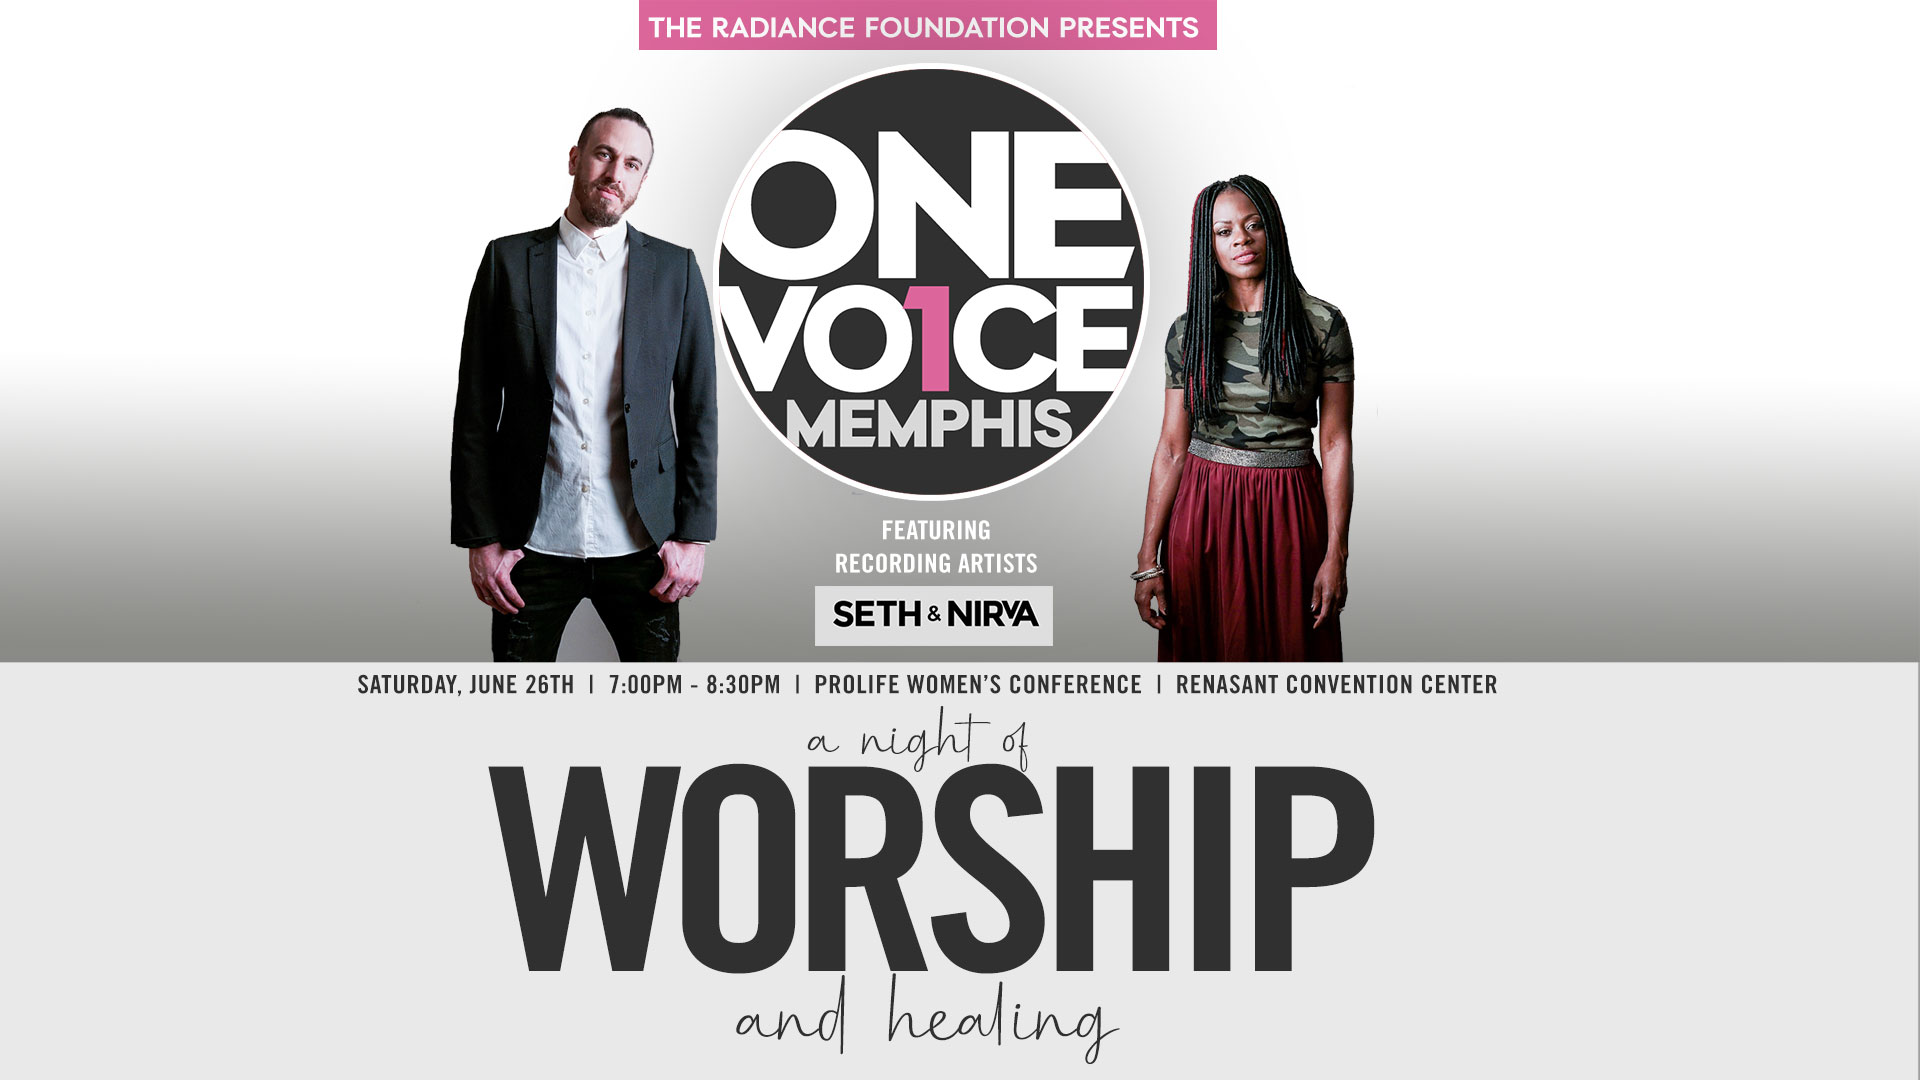 The Radiance Foundation presents OneVoiceMemphis feat Seth & Nirva